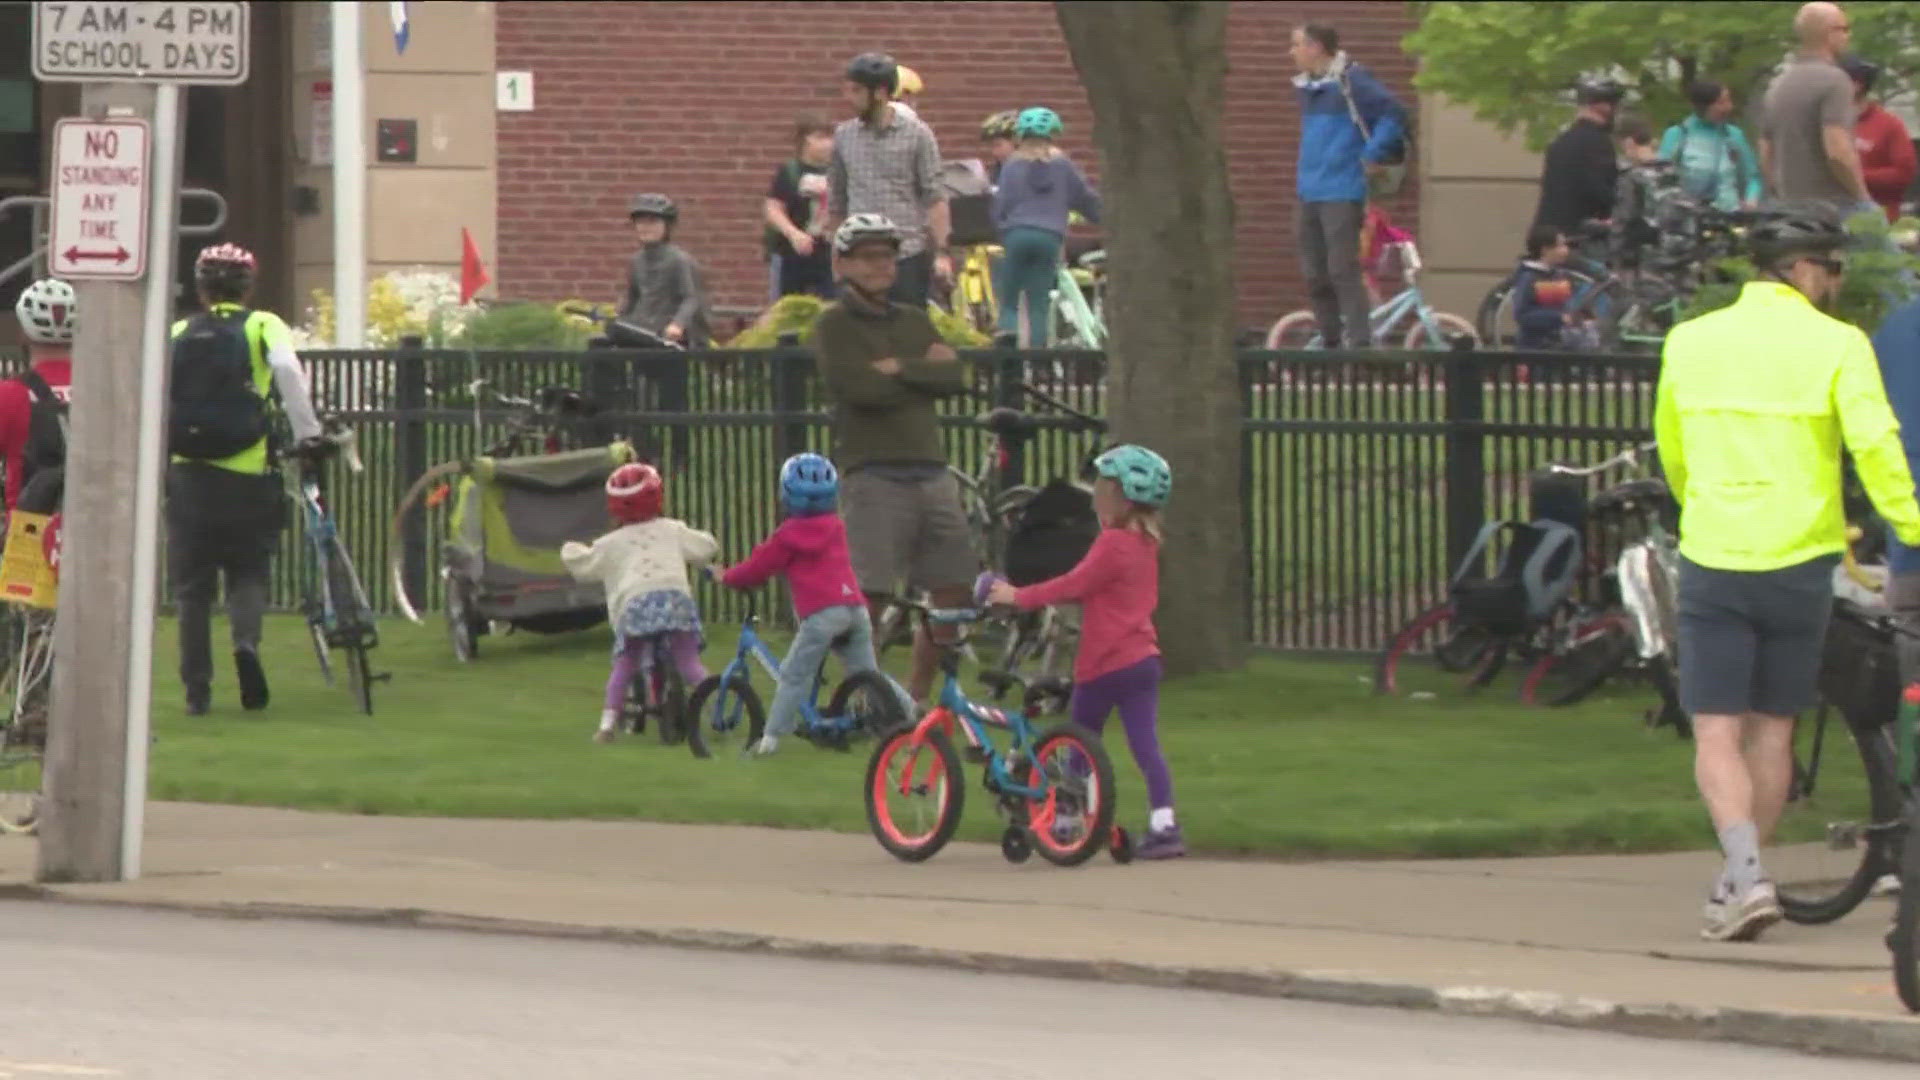 More than 100 kids and parents jumped on two wheels today, celebrating Bike to School Day in Buffalo.